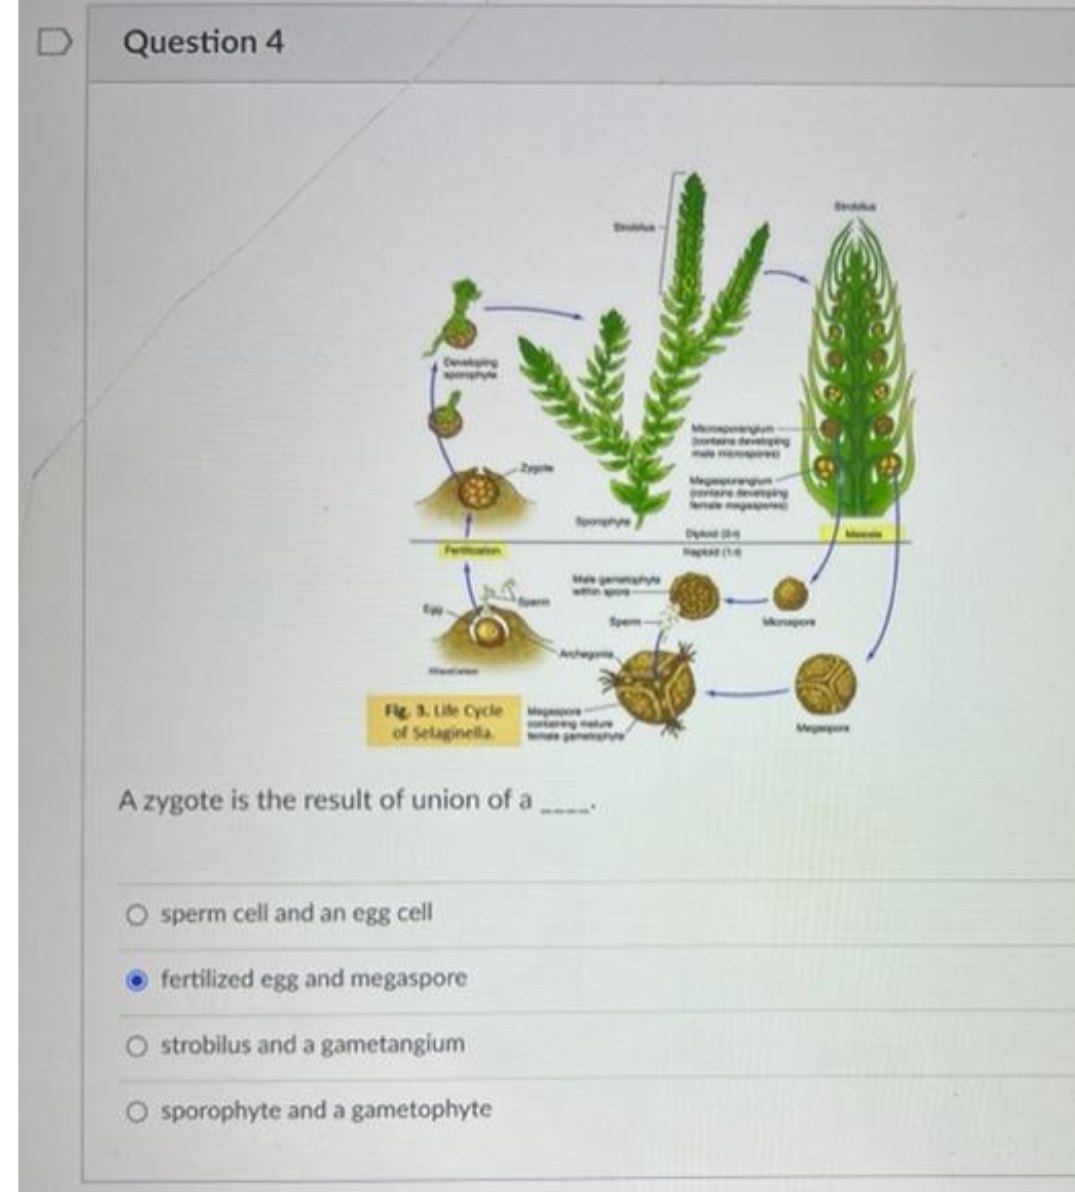 Question 4
M
fem
Mon
Fig 3, Life Cycle
of Selaginella
Me
A zygote is the result of union of a
sperm cell and an egg cell
fertilized egg and megaspore
O strobilus and a gametangium
O sporophyte and a gametophyte
